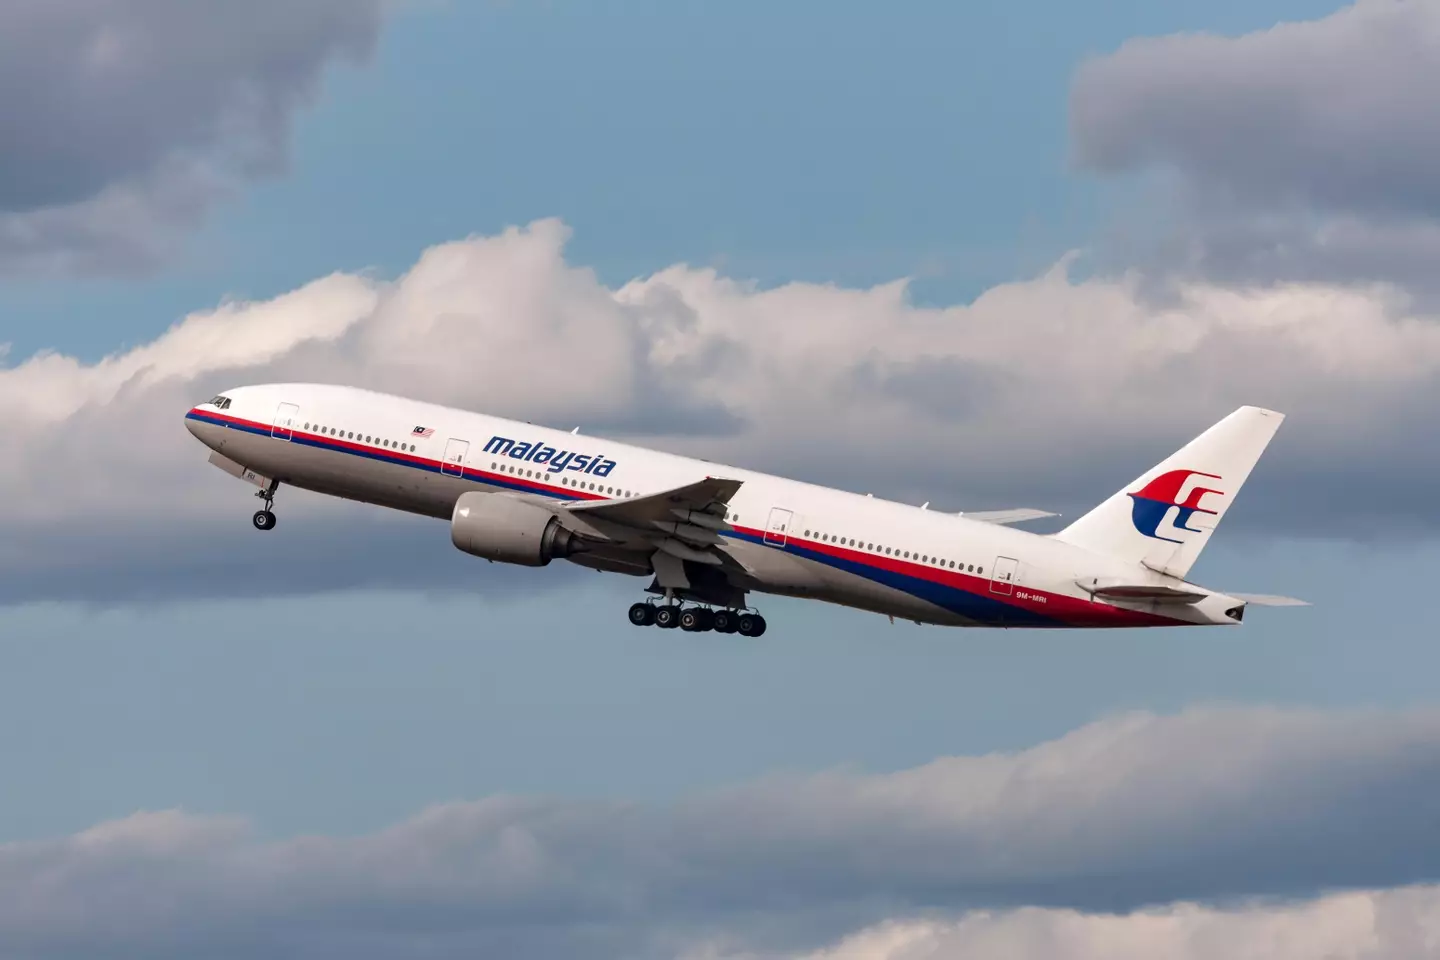 The flight was one of two Malaysian Airlines plane to crash in 2014.